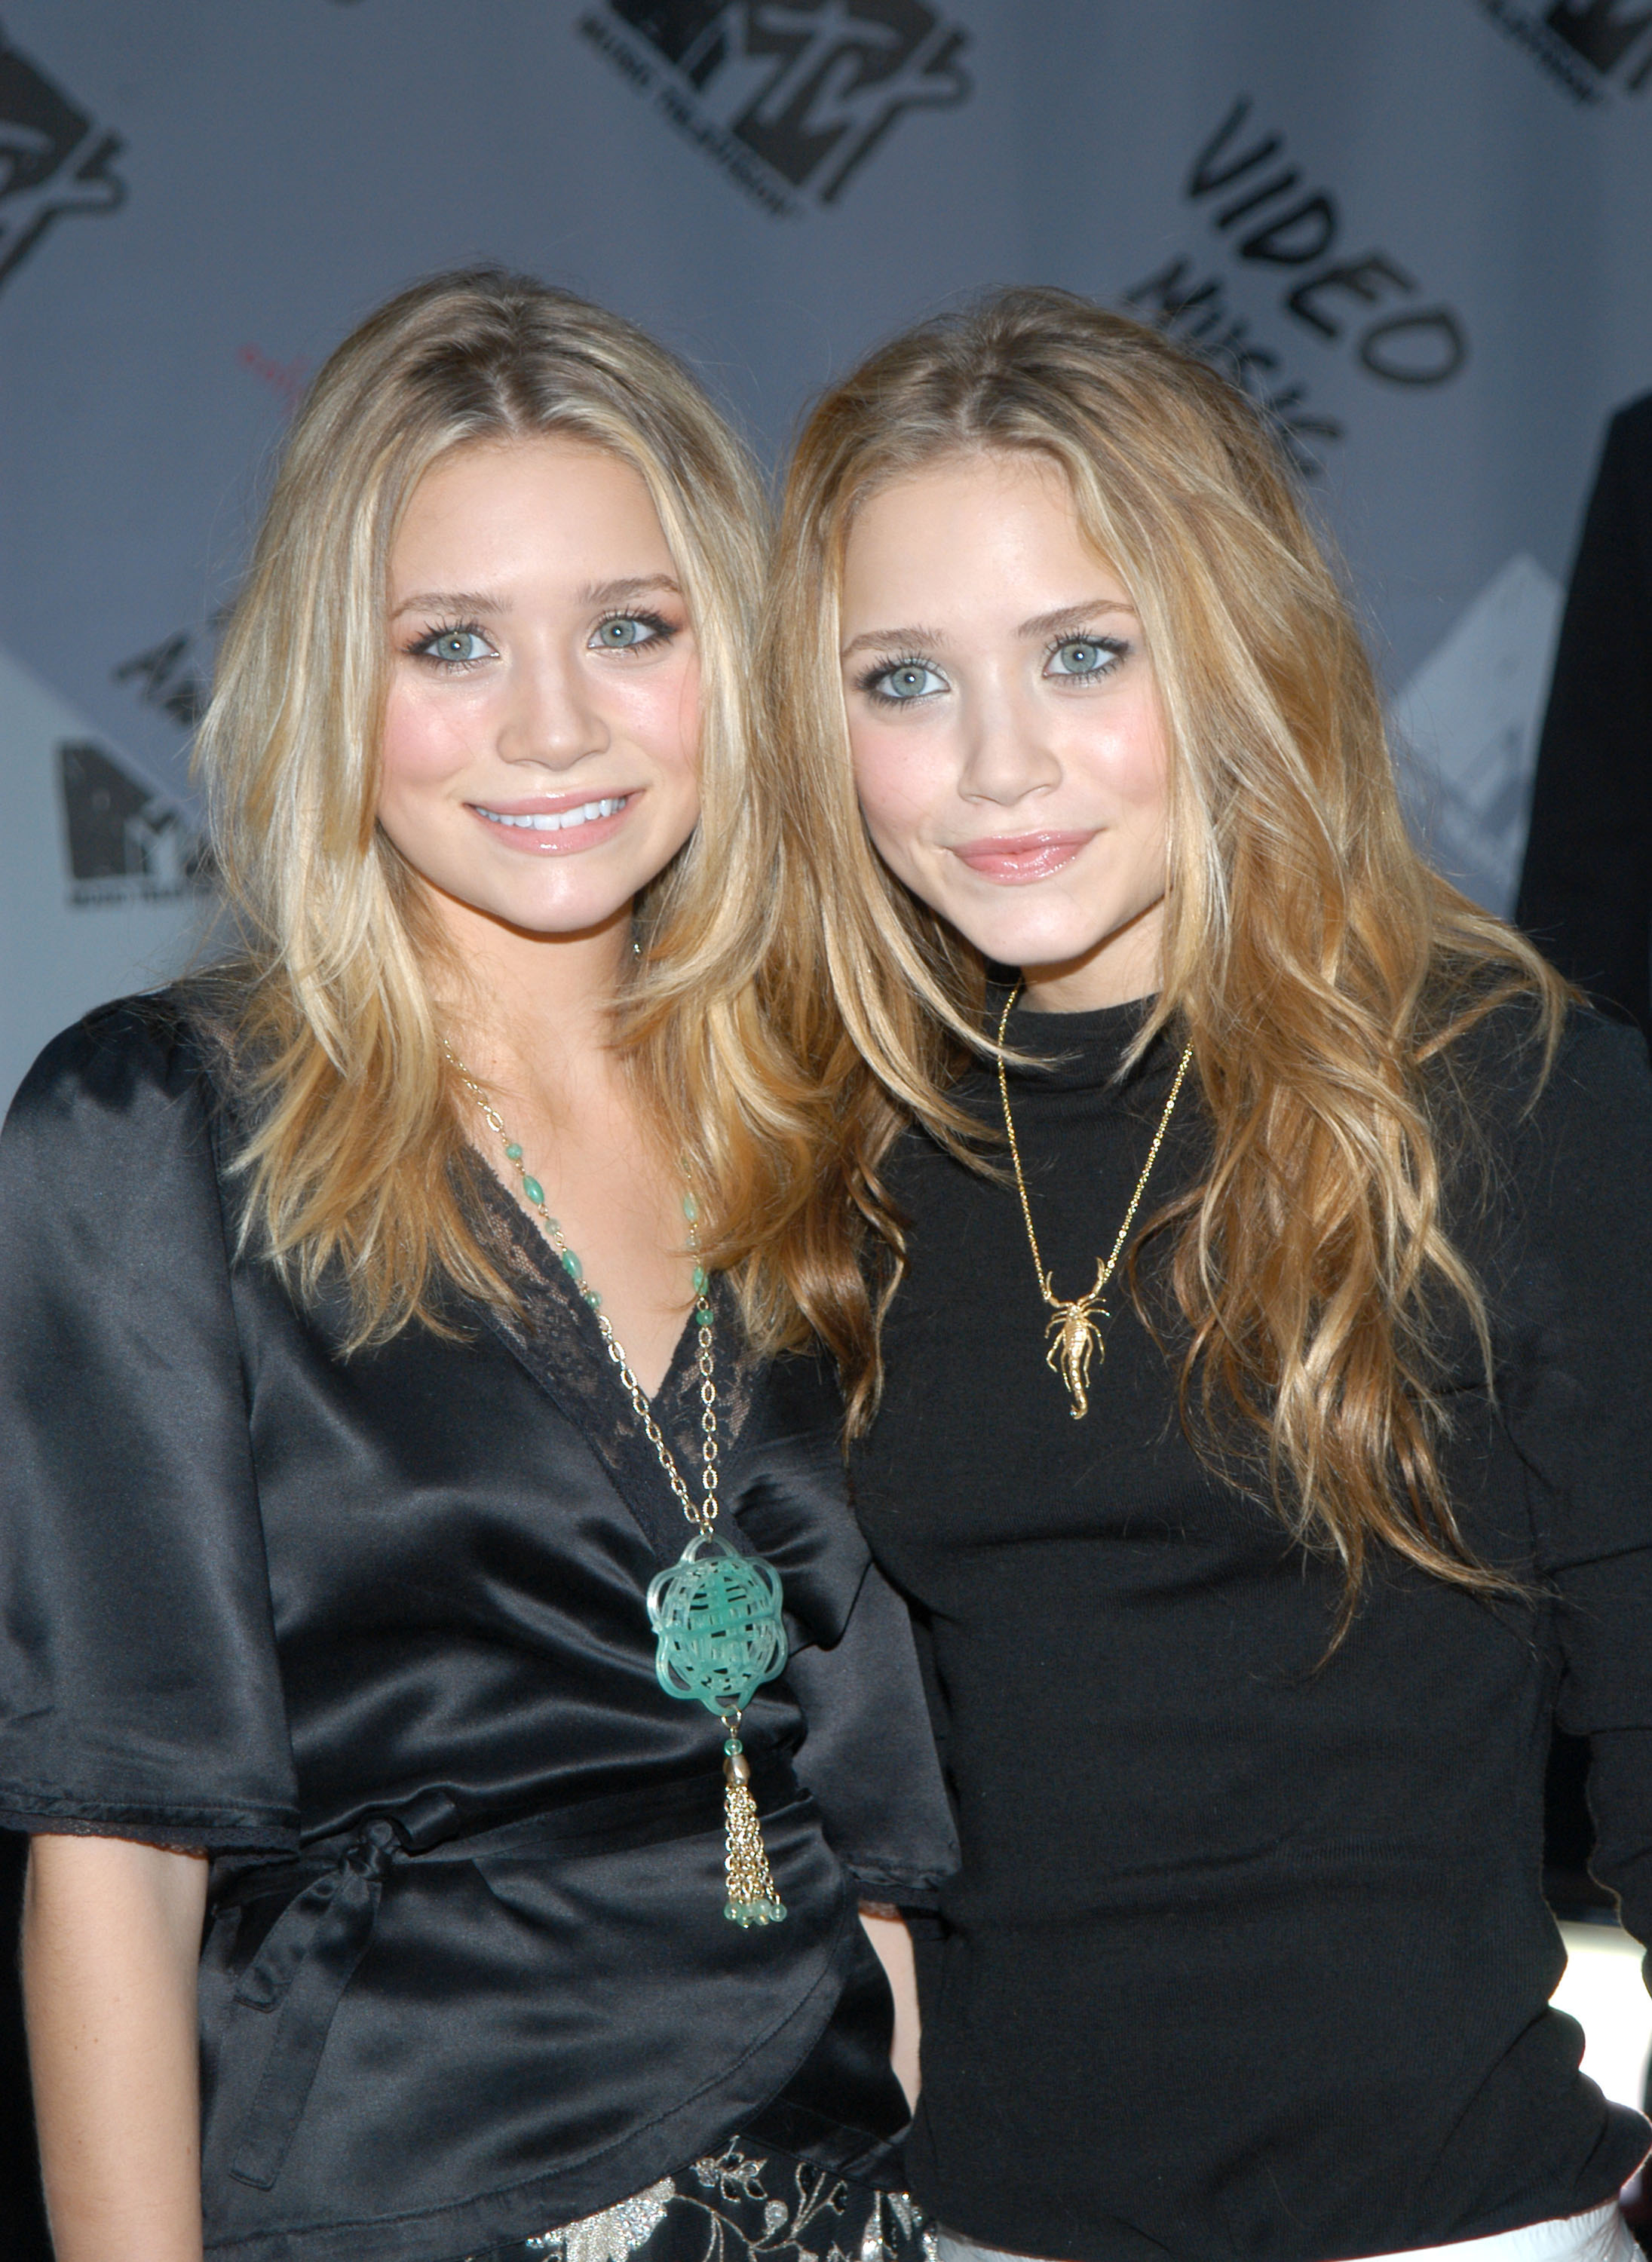 Remember '90s stars Mary-Kate and Ashley Olsen? Well they're turning 33 today and unrecognisable ...